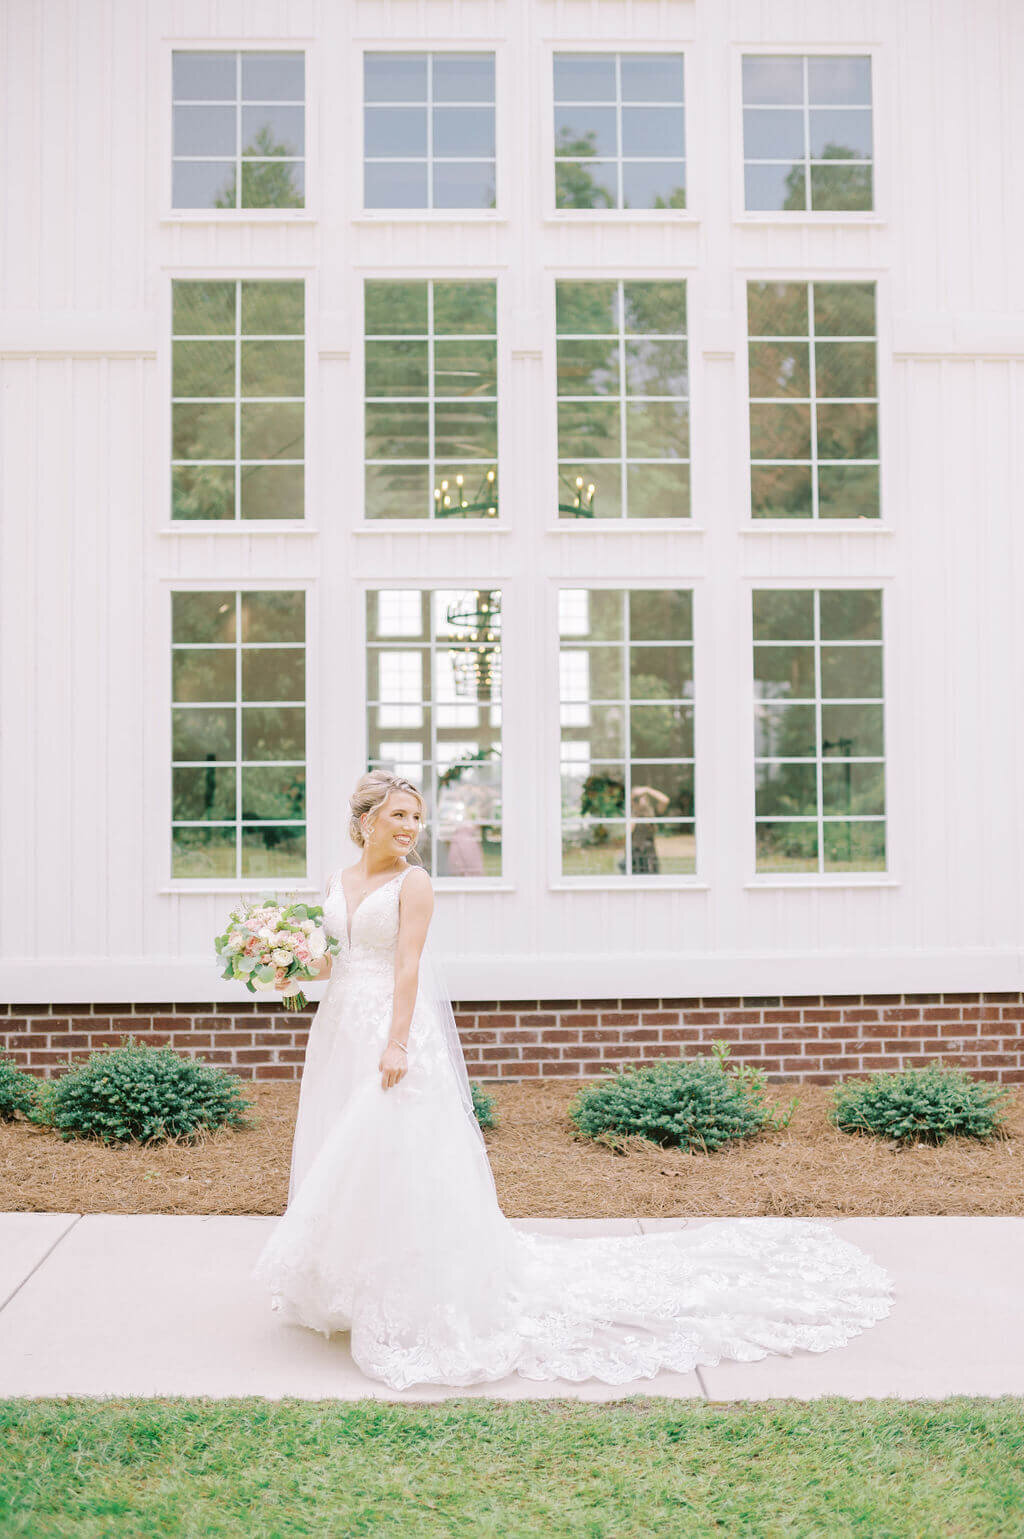 Bride swishing dress and laughing during bridal portraits